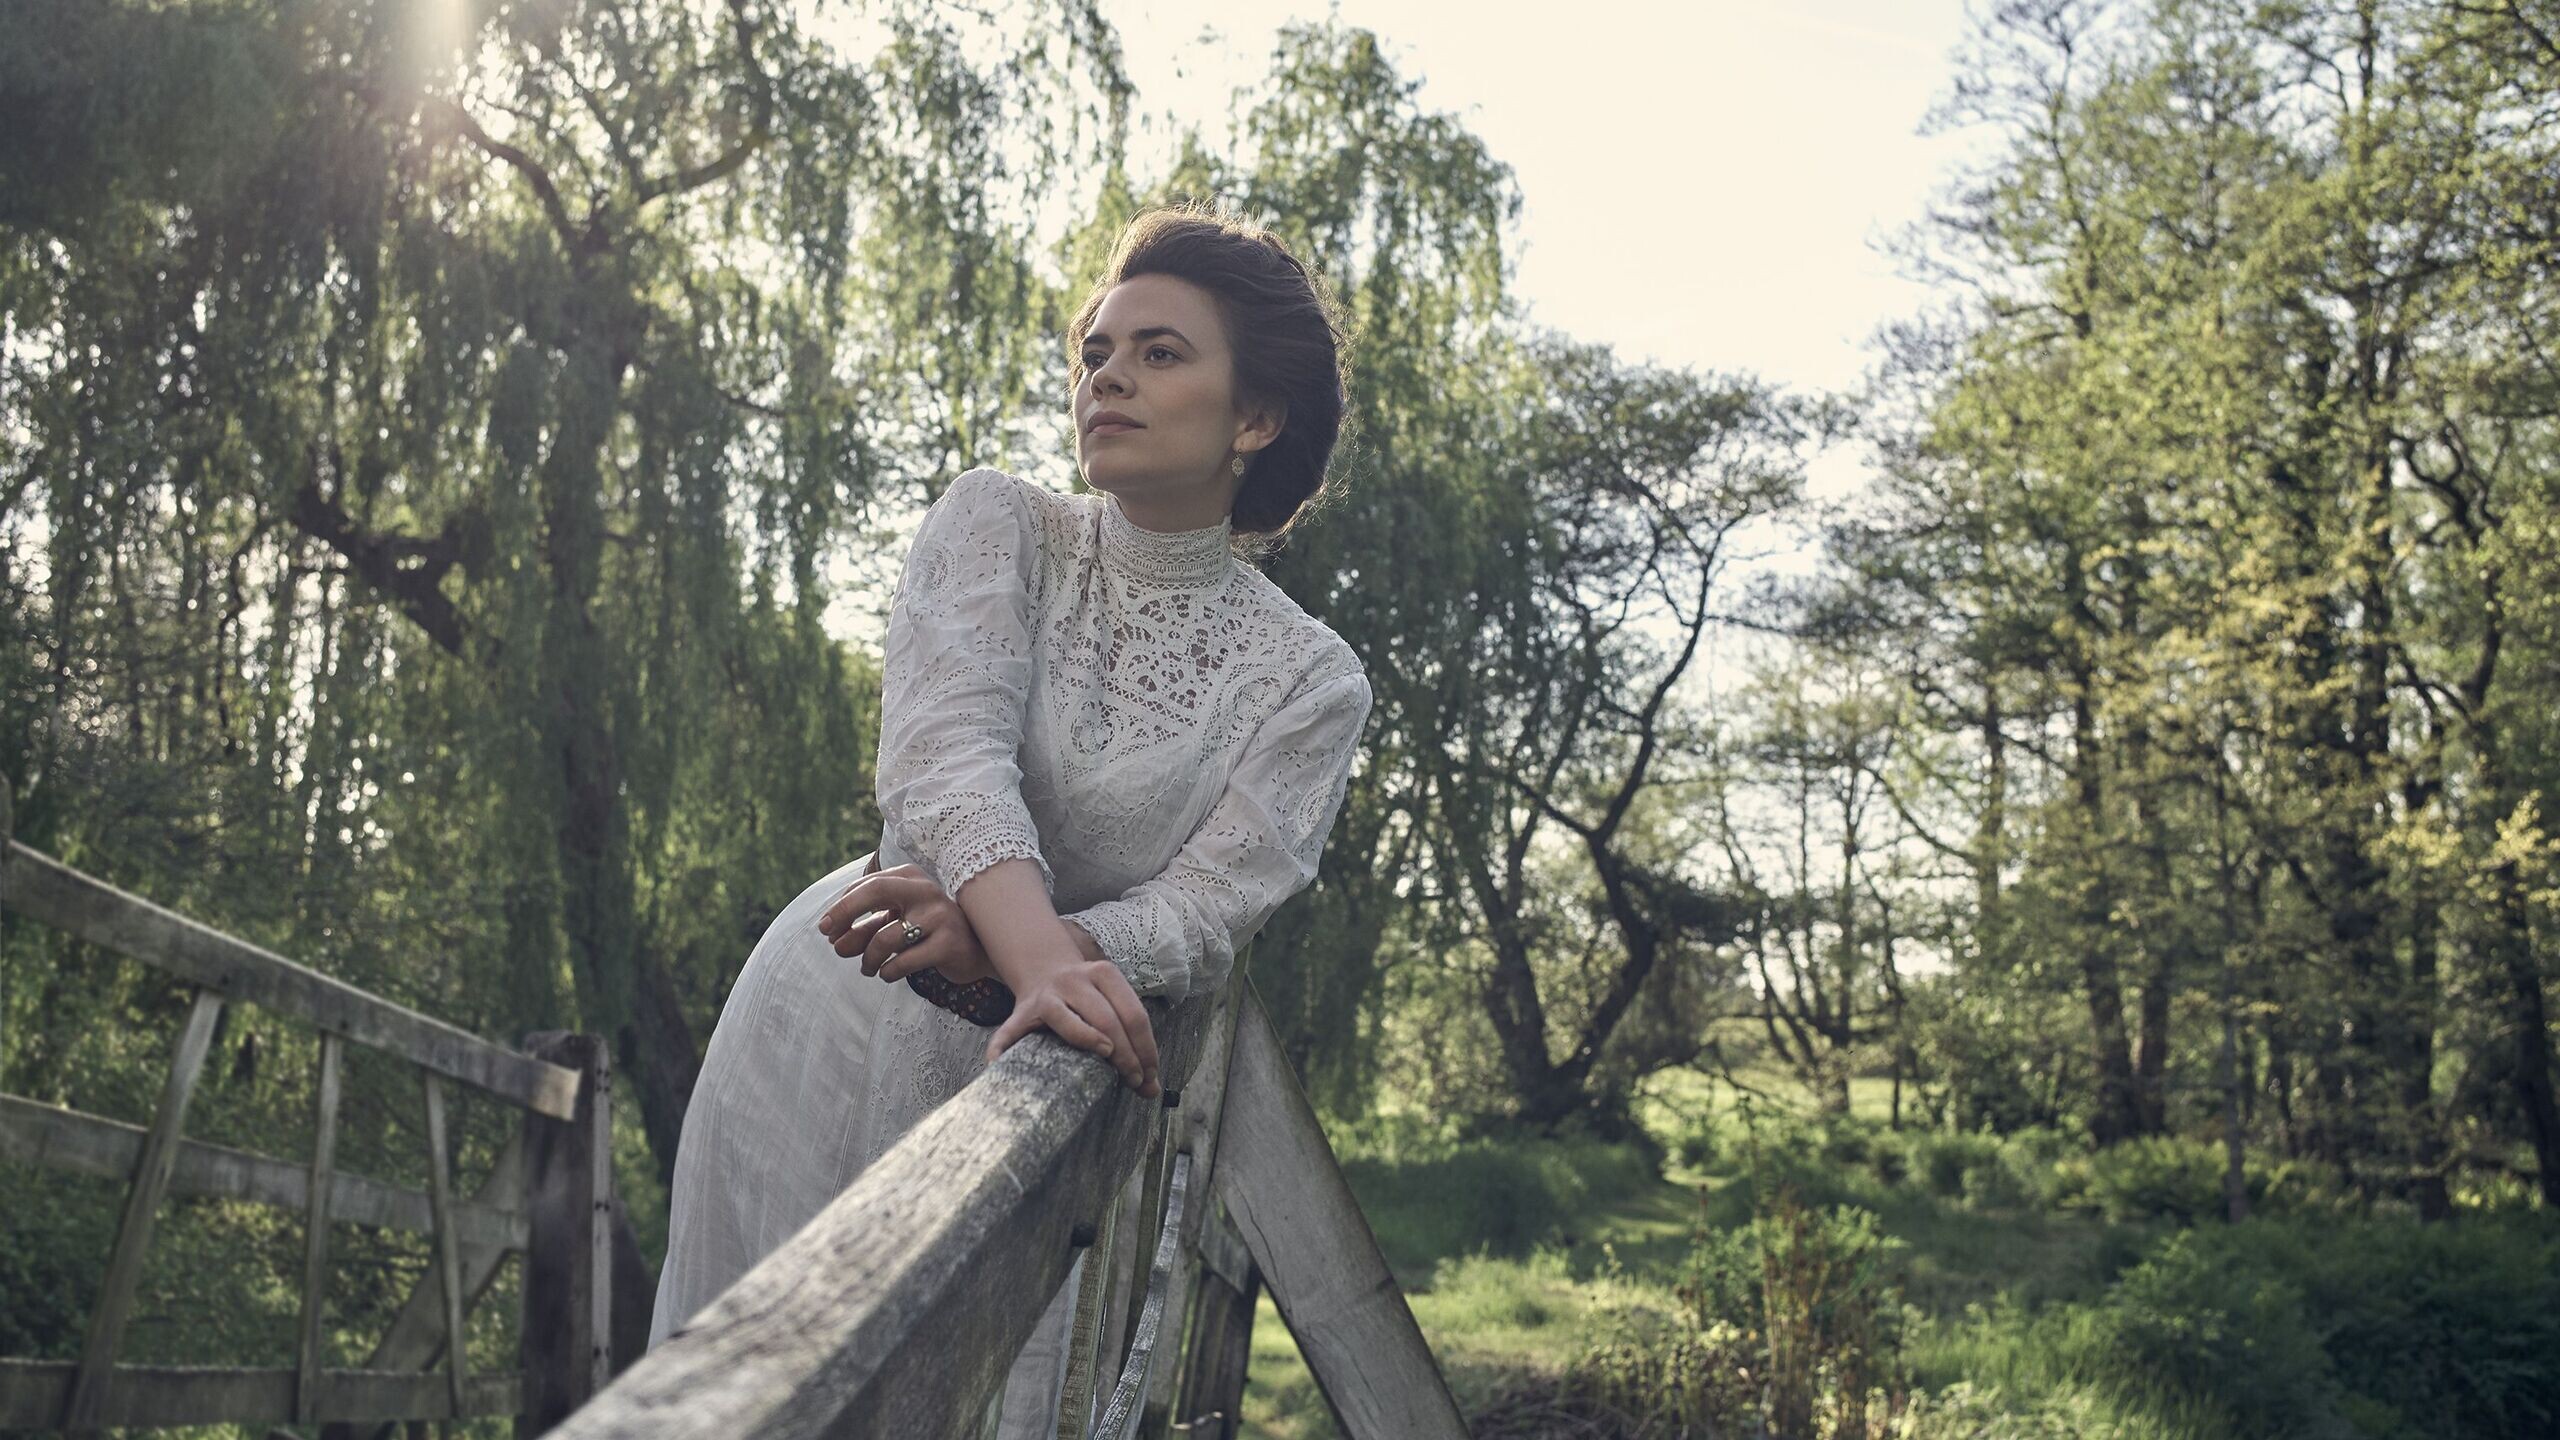 Hayley Atwell: Margaret Schlegel, Howards End, A British-American television drama directed by Hettie MacDonald. 2560x1440 HD Wallpaper.